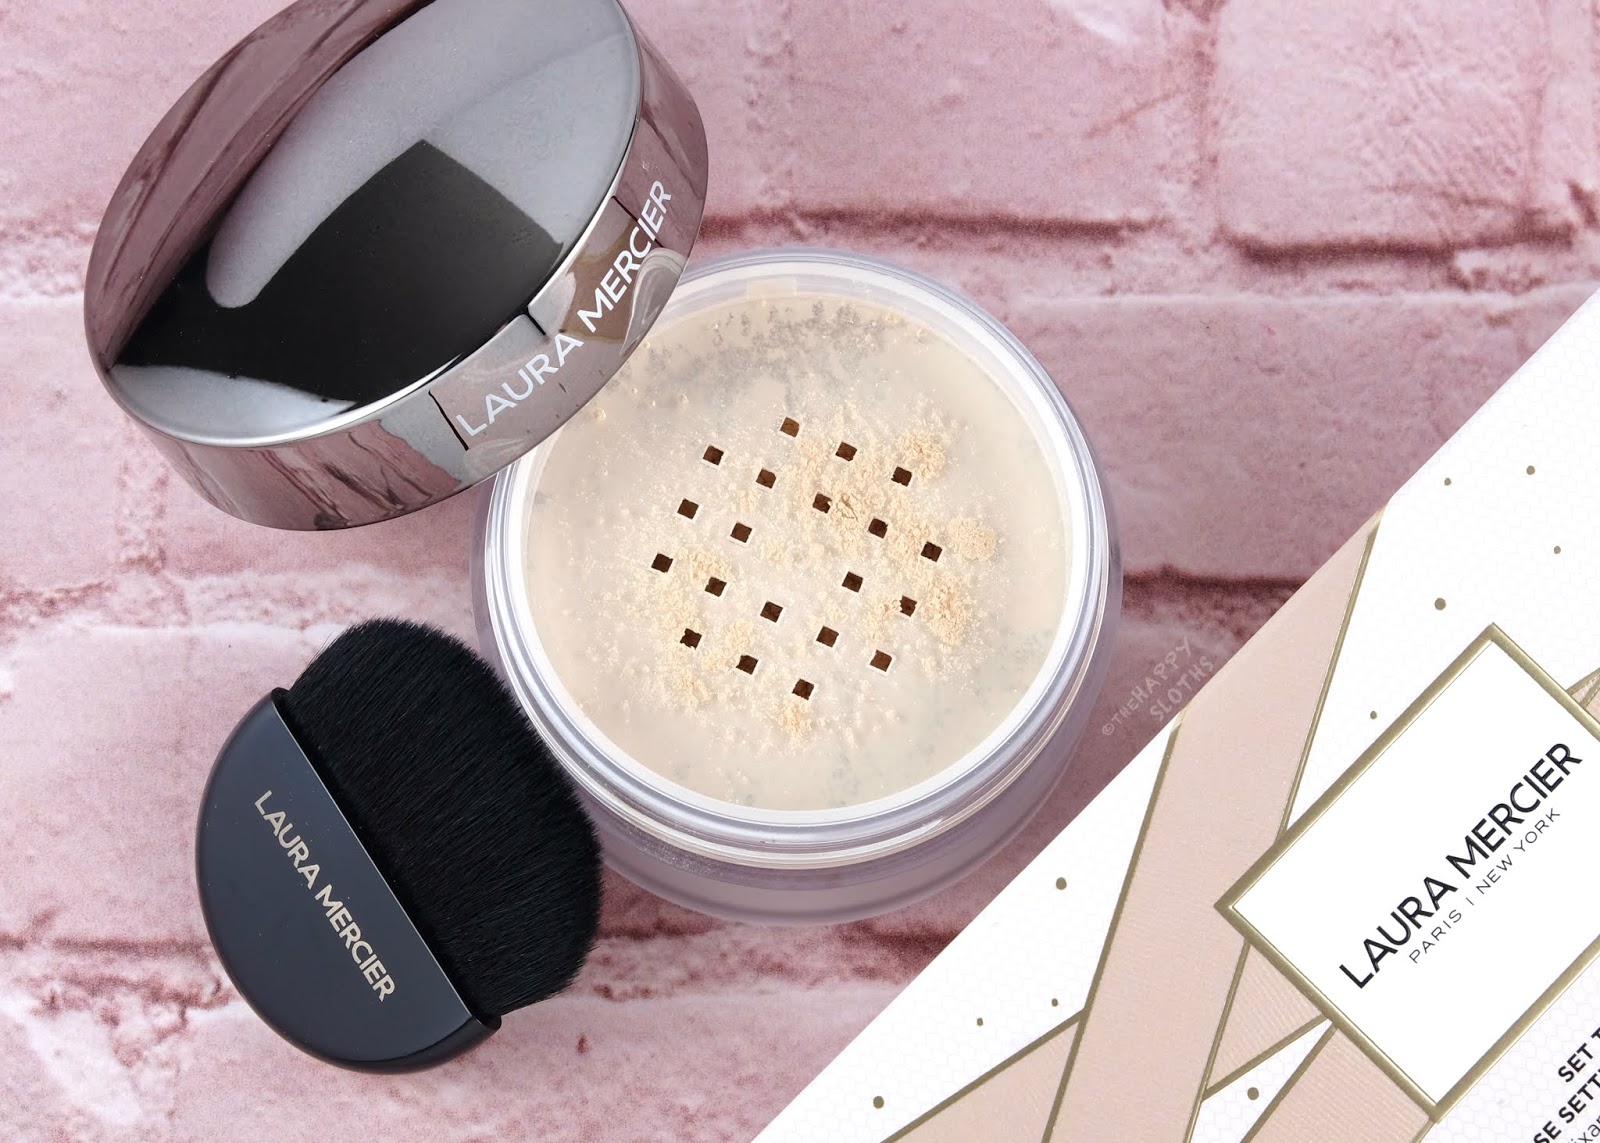 Laura Mercier | Holiday 2020 Set To Glow Translucent Loose Setting Powder Glow & Brush Set: Review and Swatches